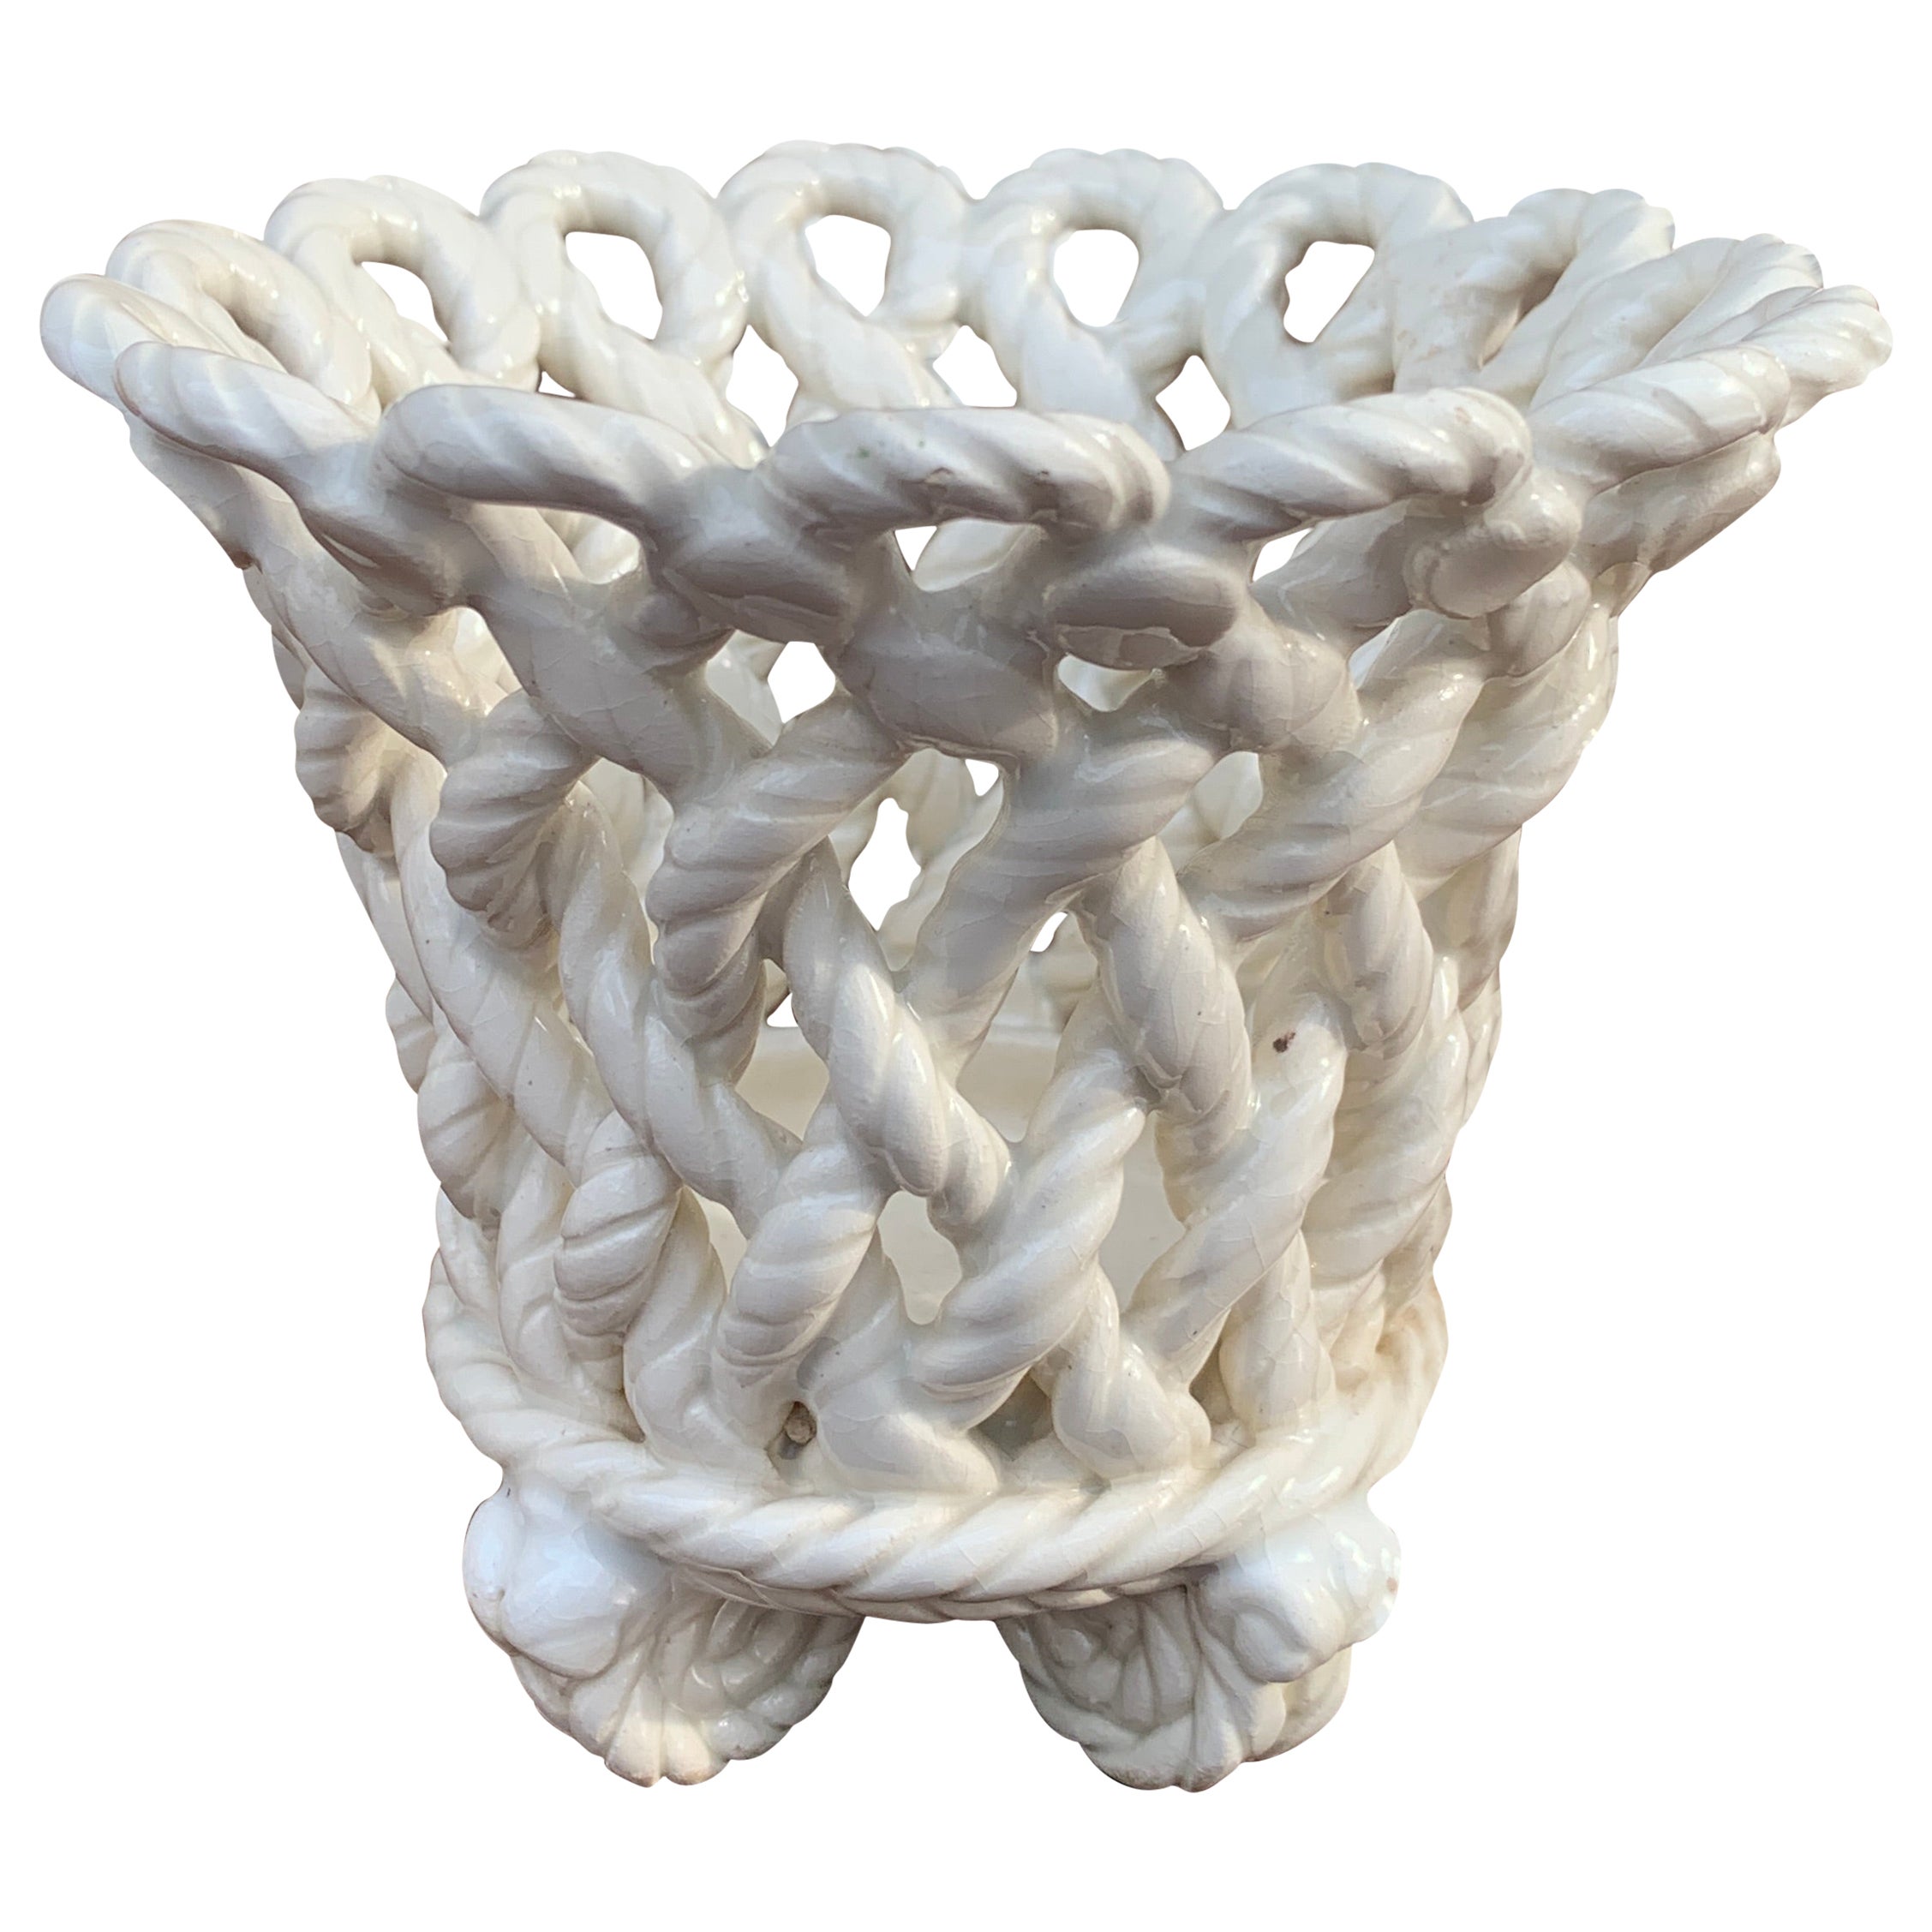 French Country White Ceramic Woven Rope Cachepot Basket